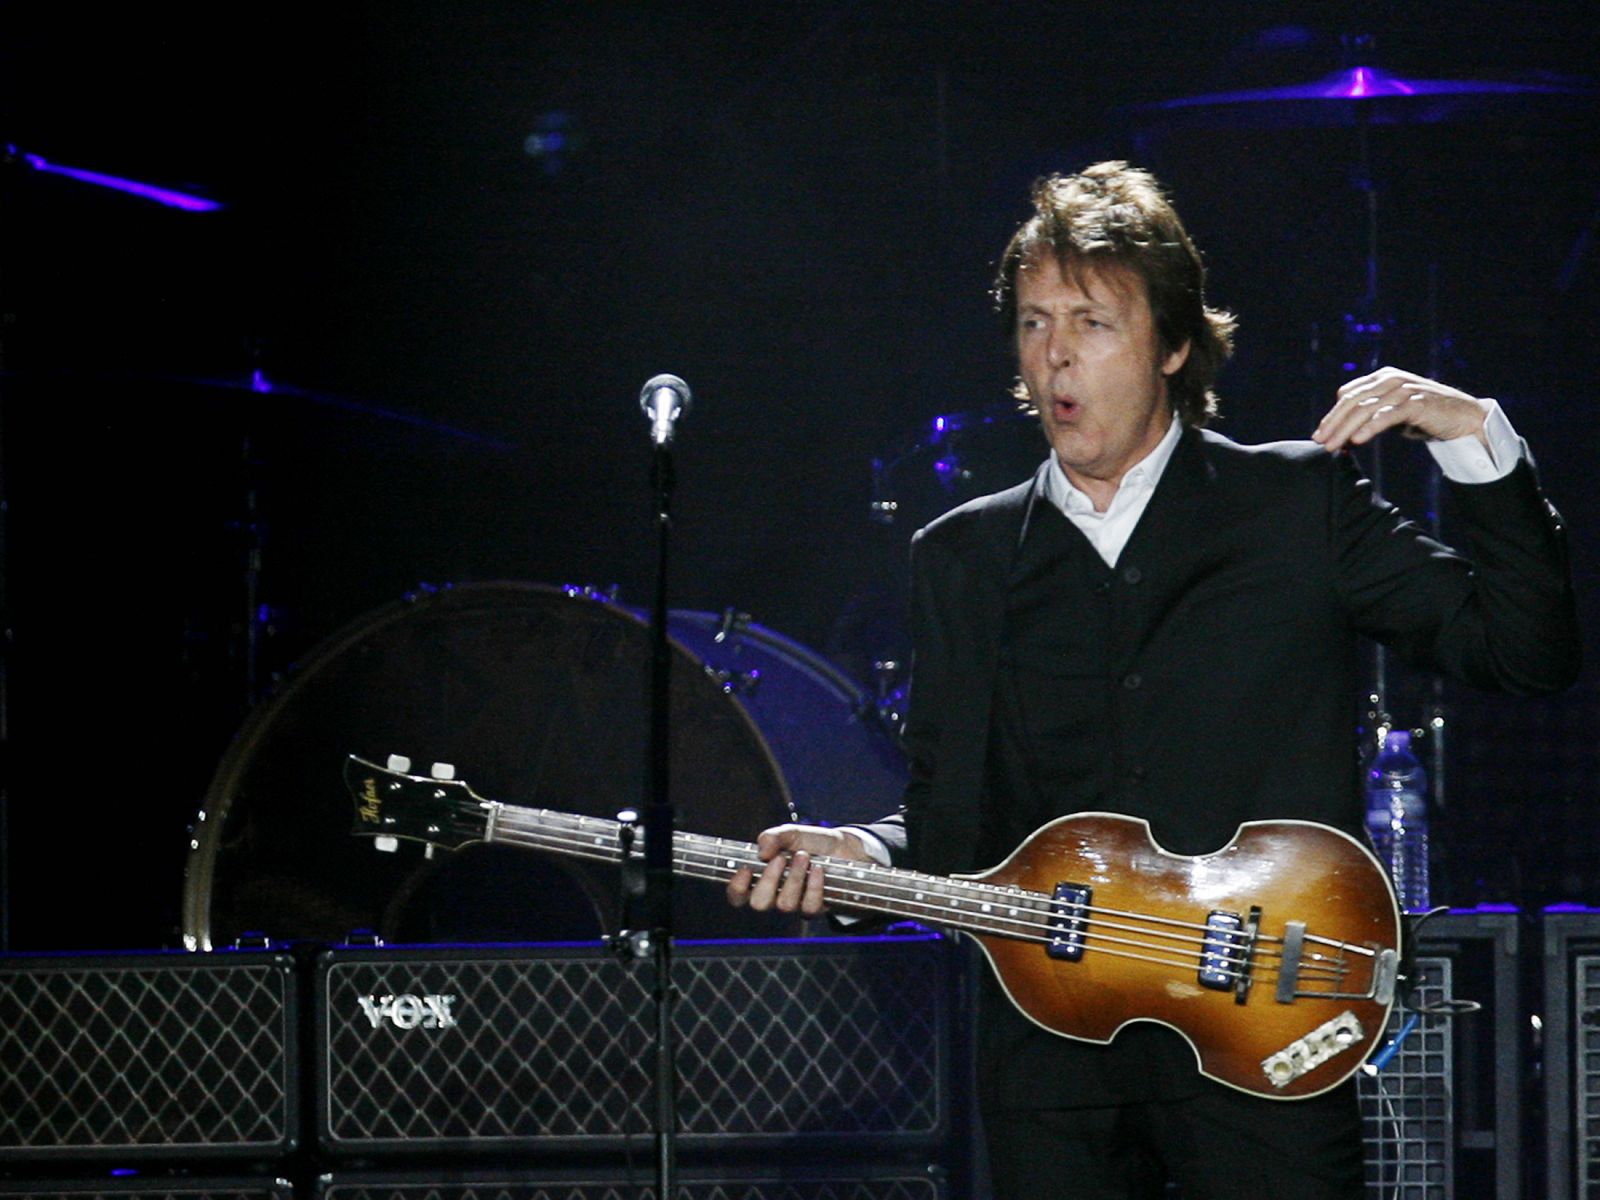 Paul McCartney, formerly a member of The Beatles, performs with his band during a concert at CitiField in New York